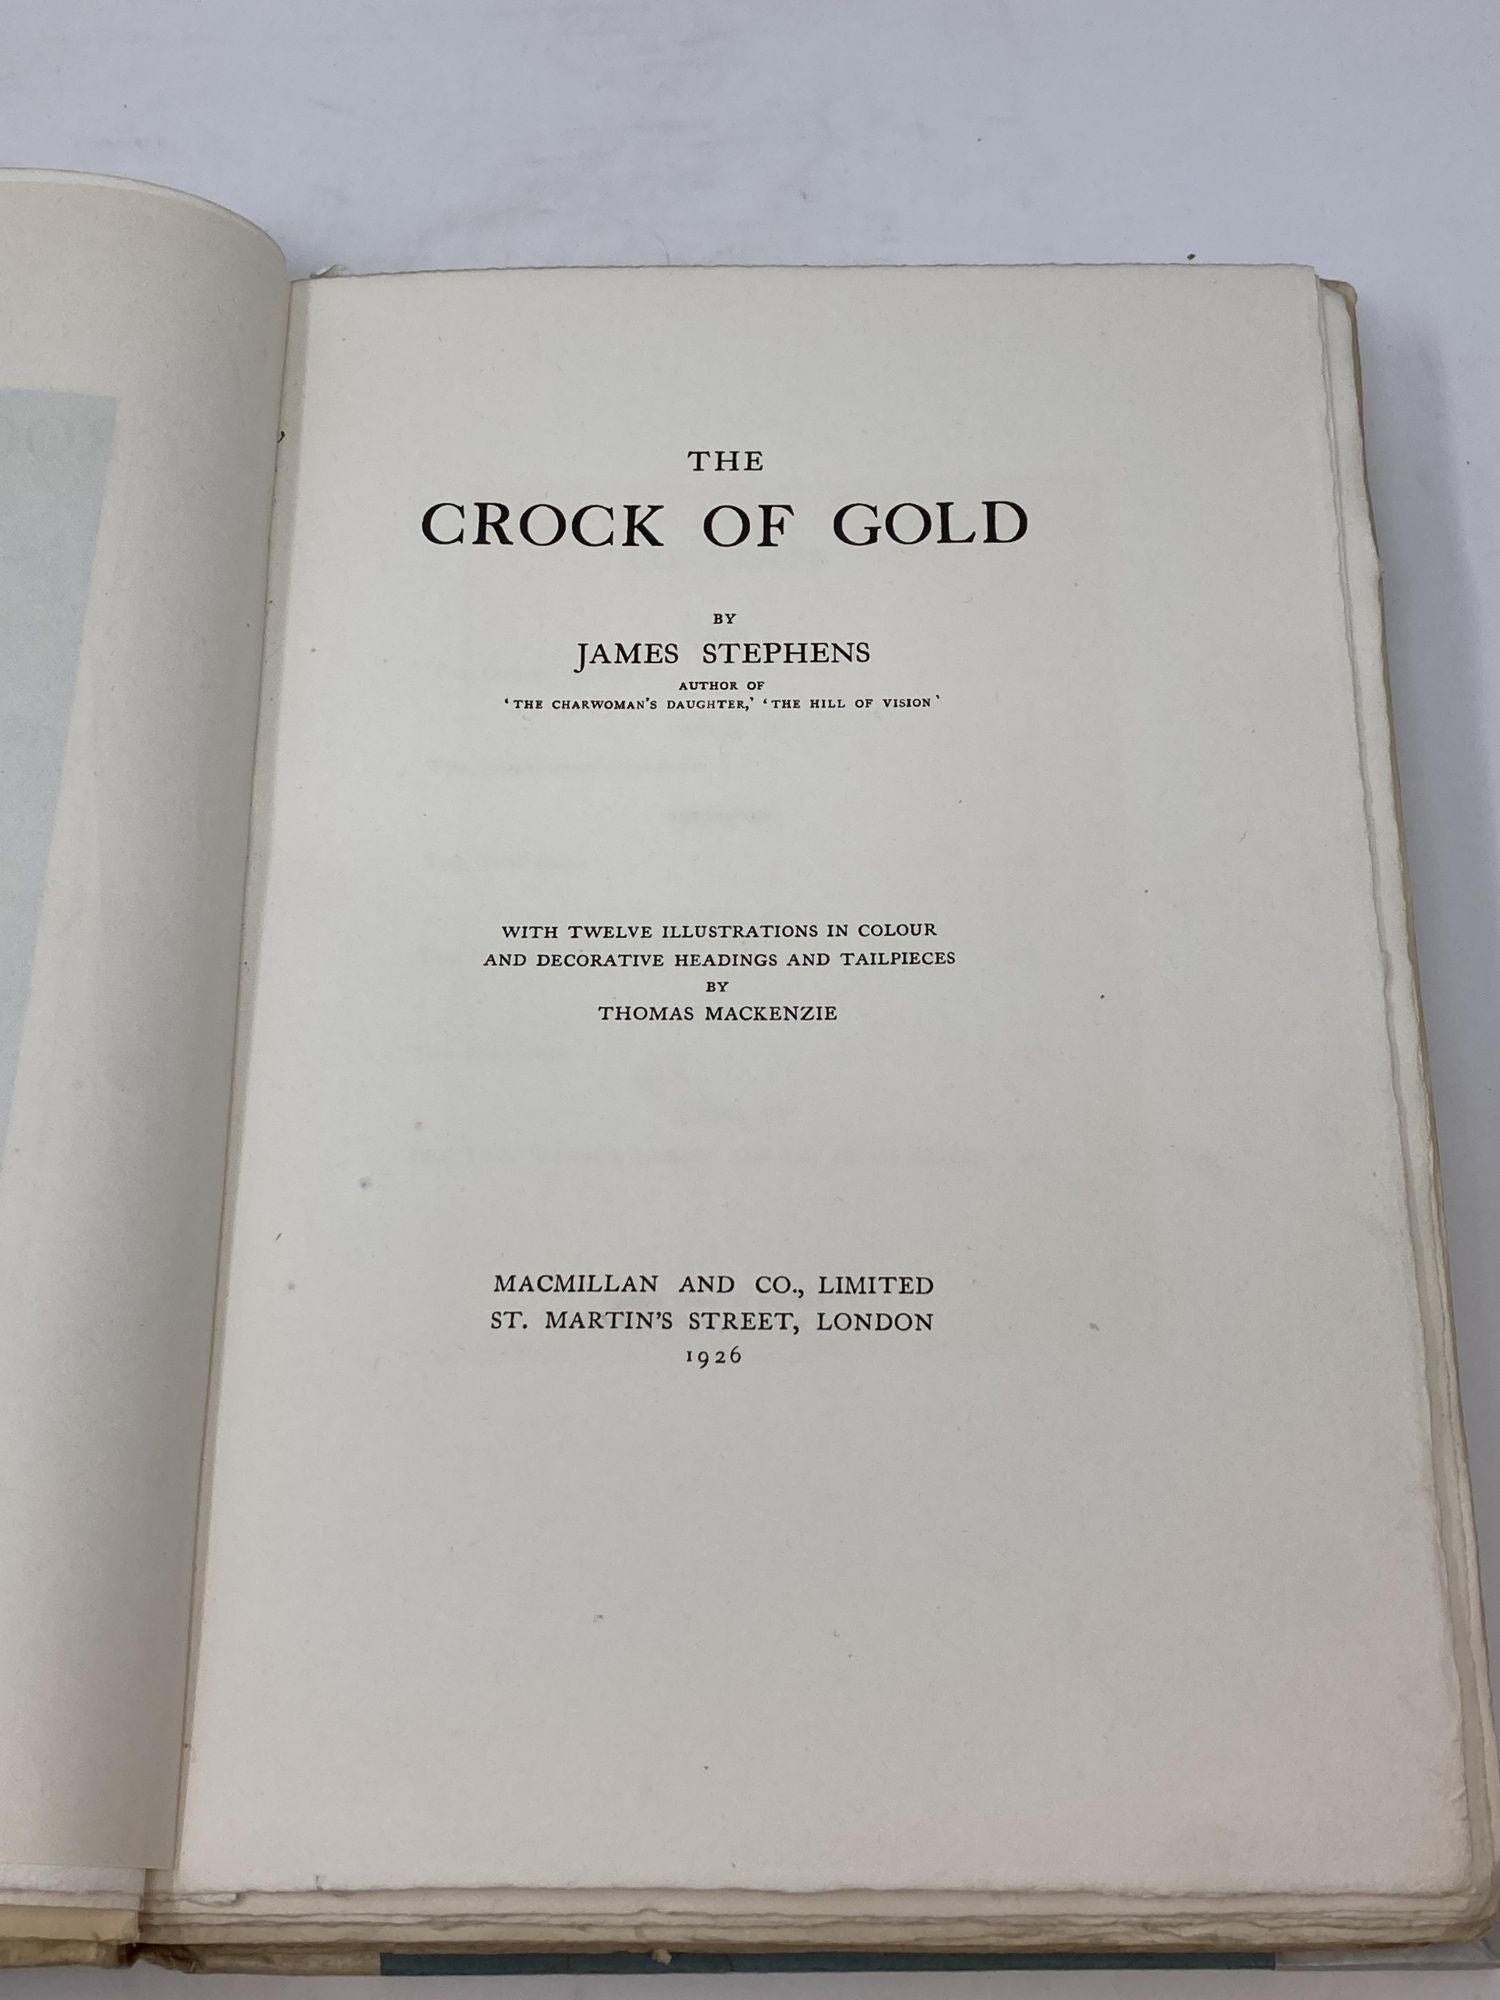 Stephens, James - The Crock of Gold (Signed); with Twelve Illustrations in Colour and Decorative Headings and Tailpieces by Thomas Mackenzie (Signed)